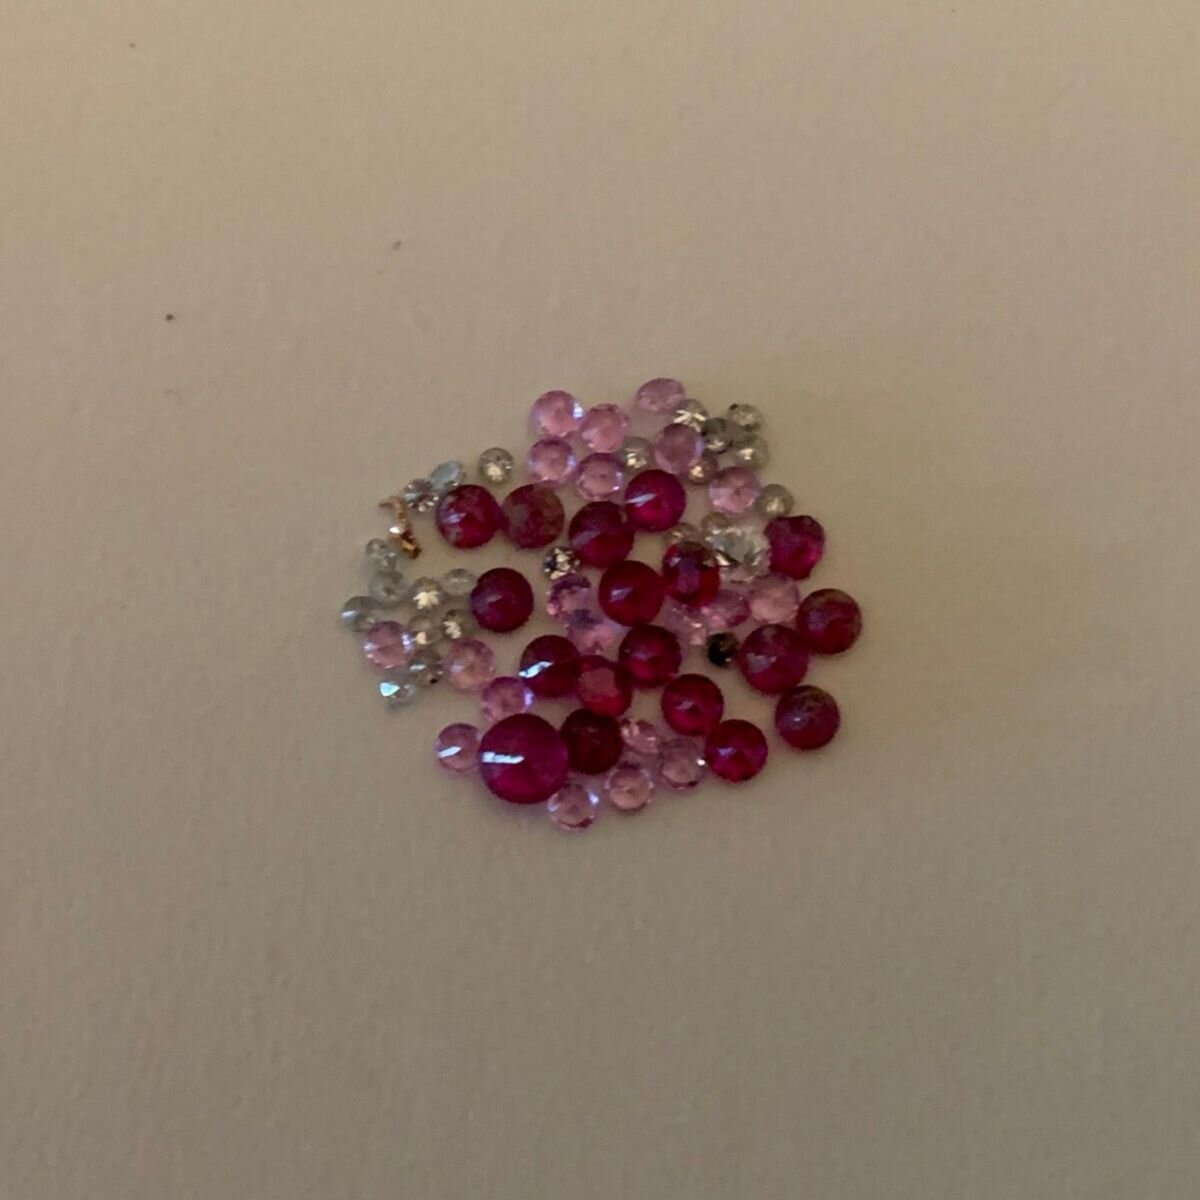 Rubies, Diamonds, and Sapphires laid out for a custom Rose Gold Signet Ring by Jane Becker for JBJewels.jpeg